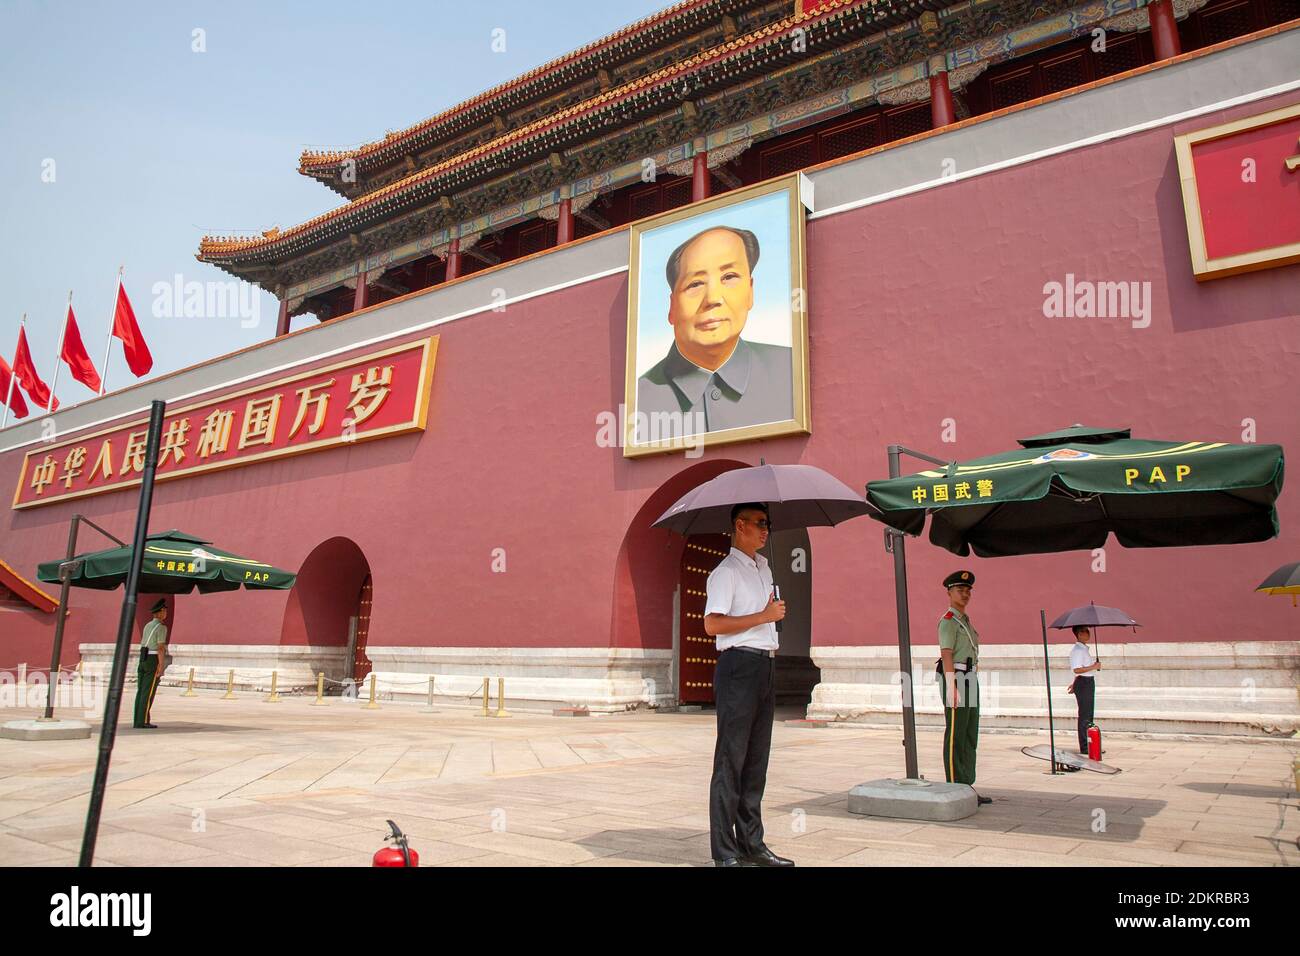 Tiananmen Gate of Heavenly Peace with portrait of Chairman Mao Zedong and Chinese Police guard under umbrella in Beijing Stock Photo